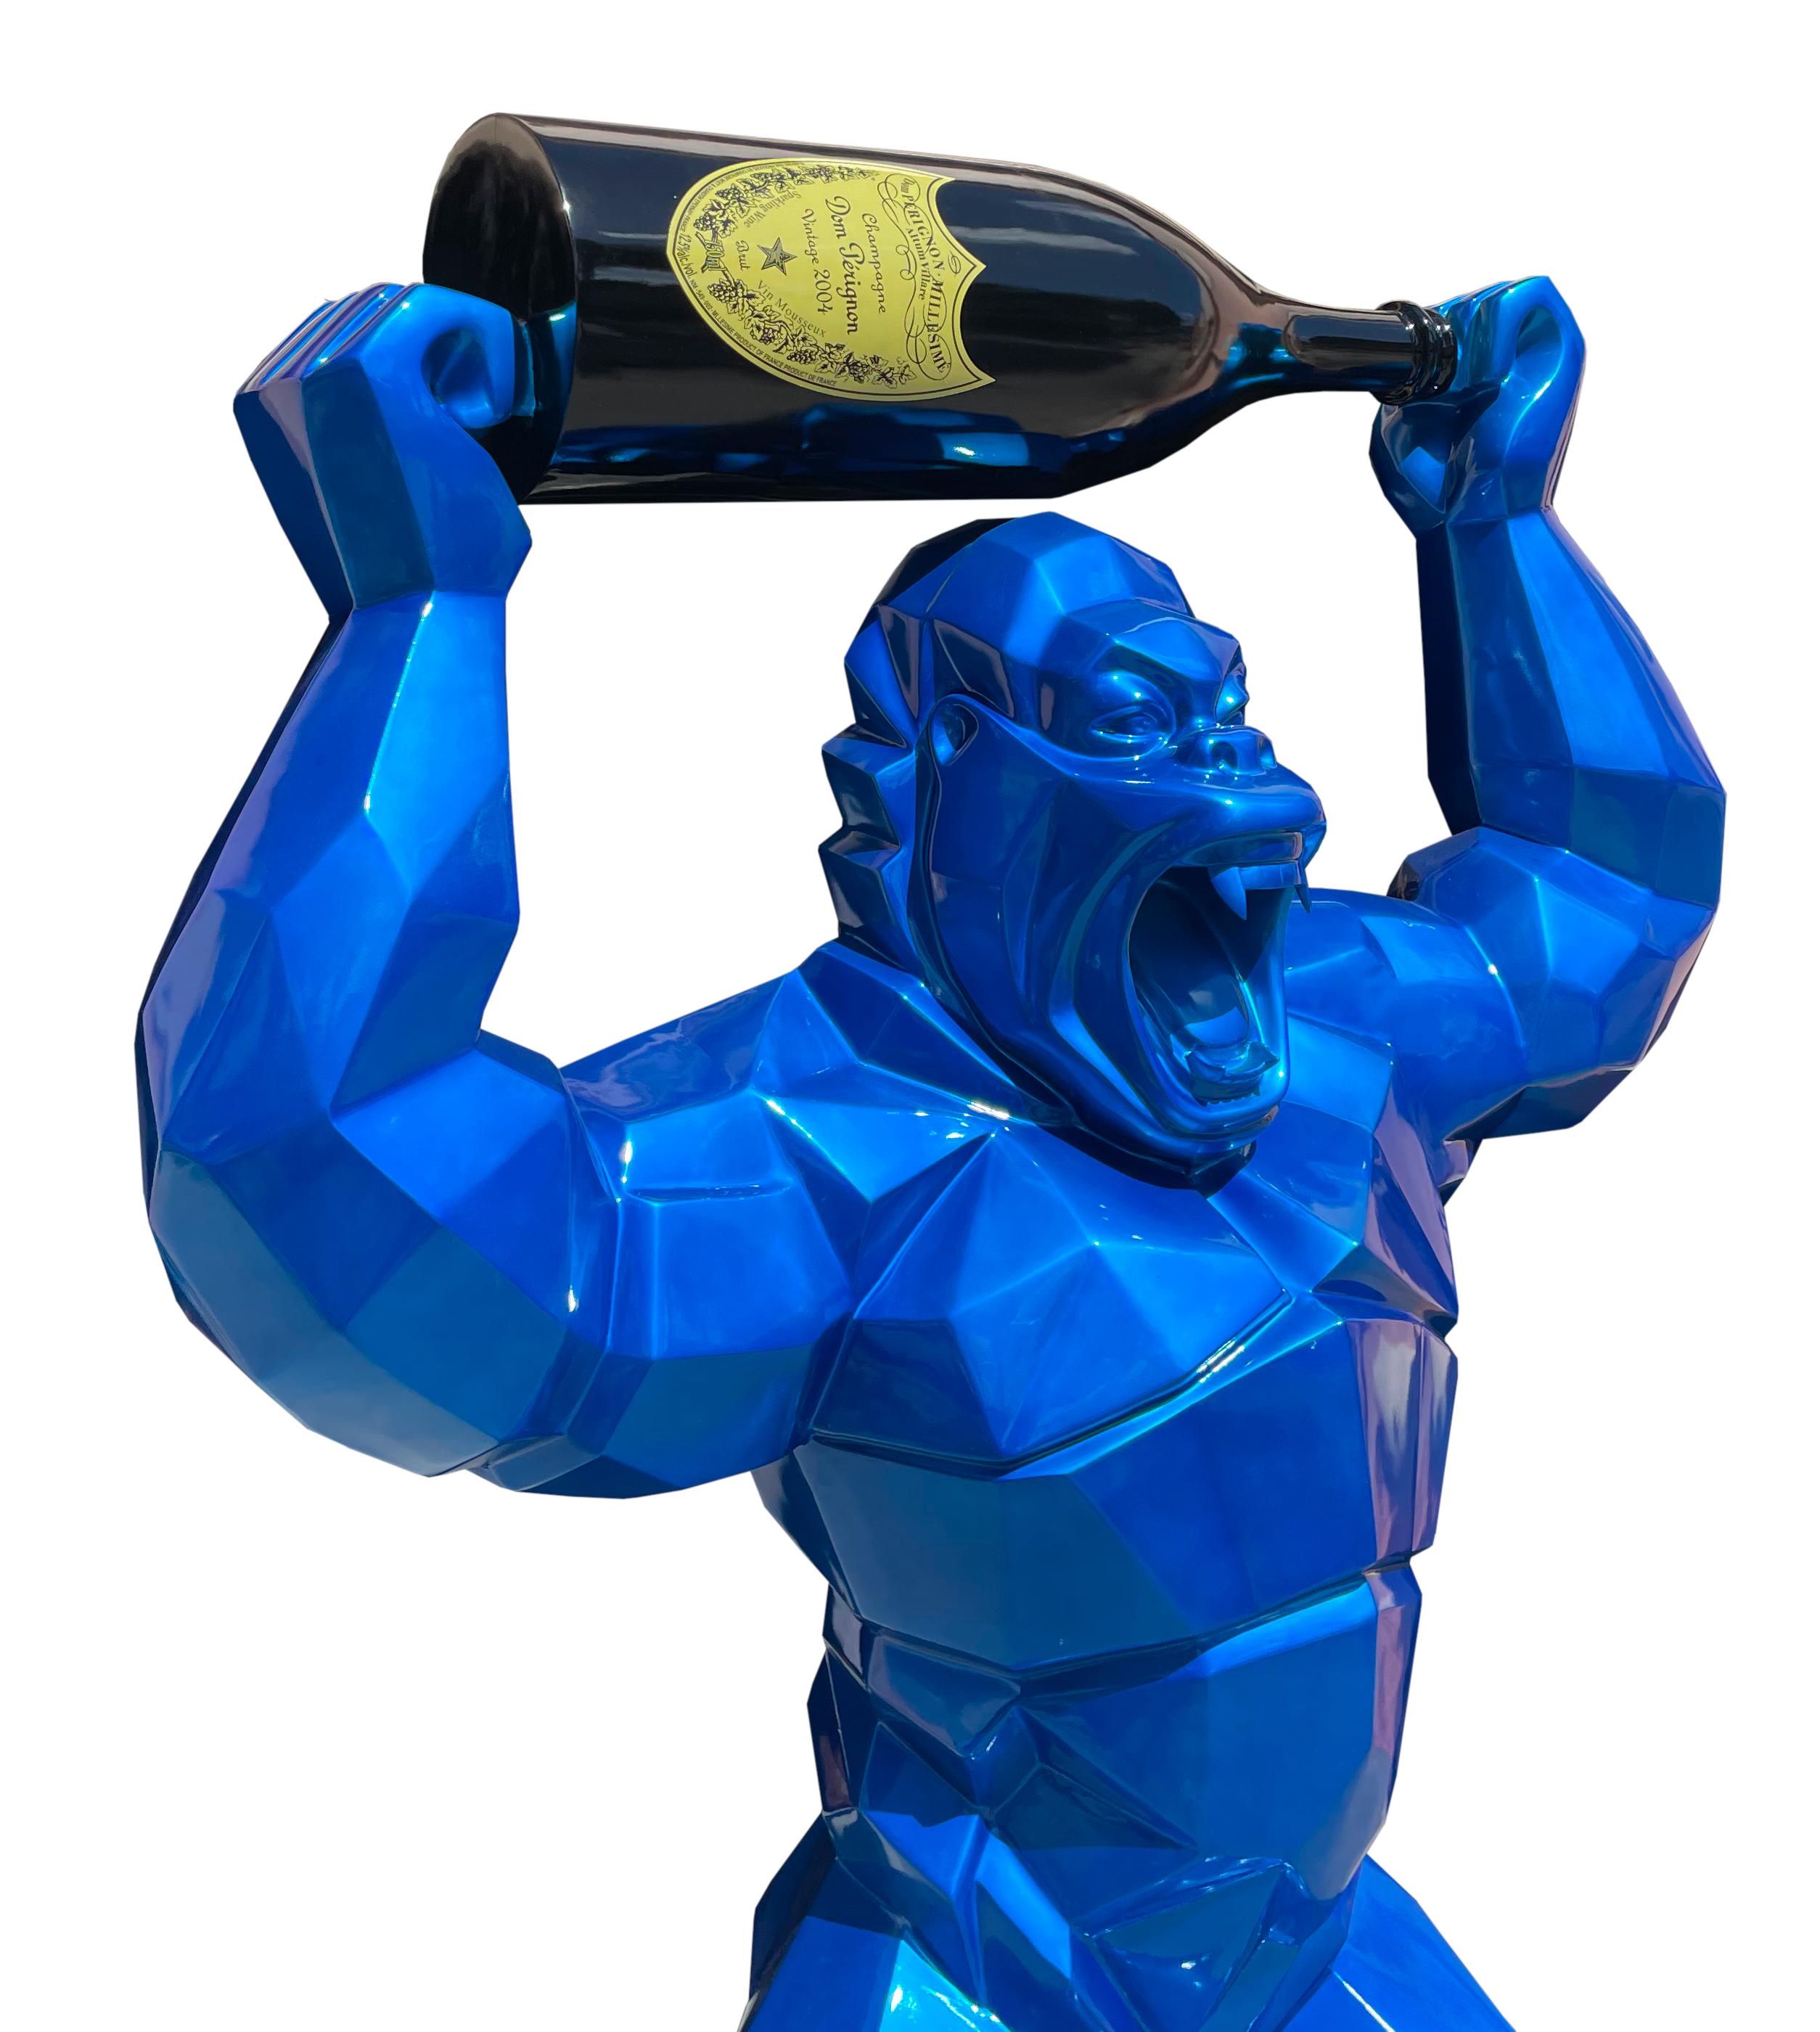 Contemporary Eight Foot Gorilla with Champagne Bottle
Year of work: 2022
Materials: Resin, Fiber Glass, Acrylic
Medium: Sculpture
Dimensions: 96 in. x 69 in. x 36 in. / 243 cm x 175 cm x 91 cm.